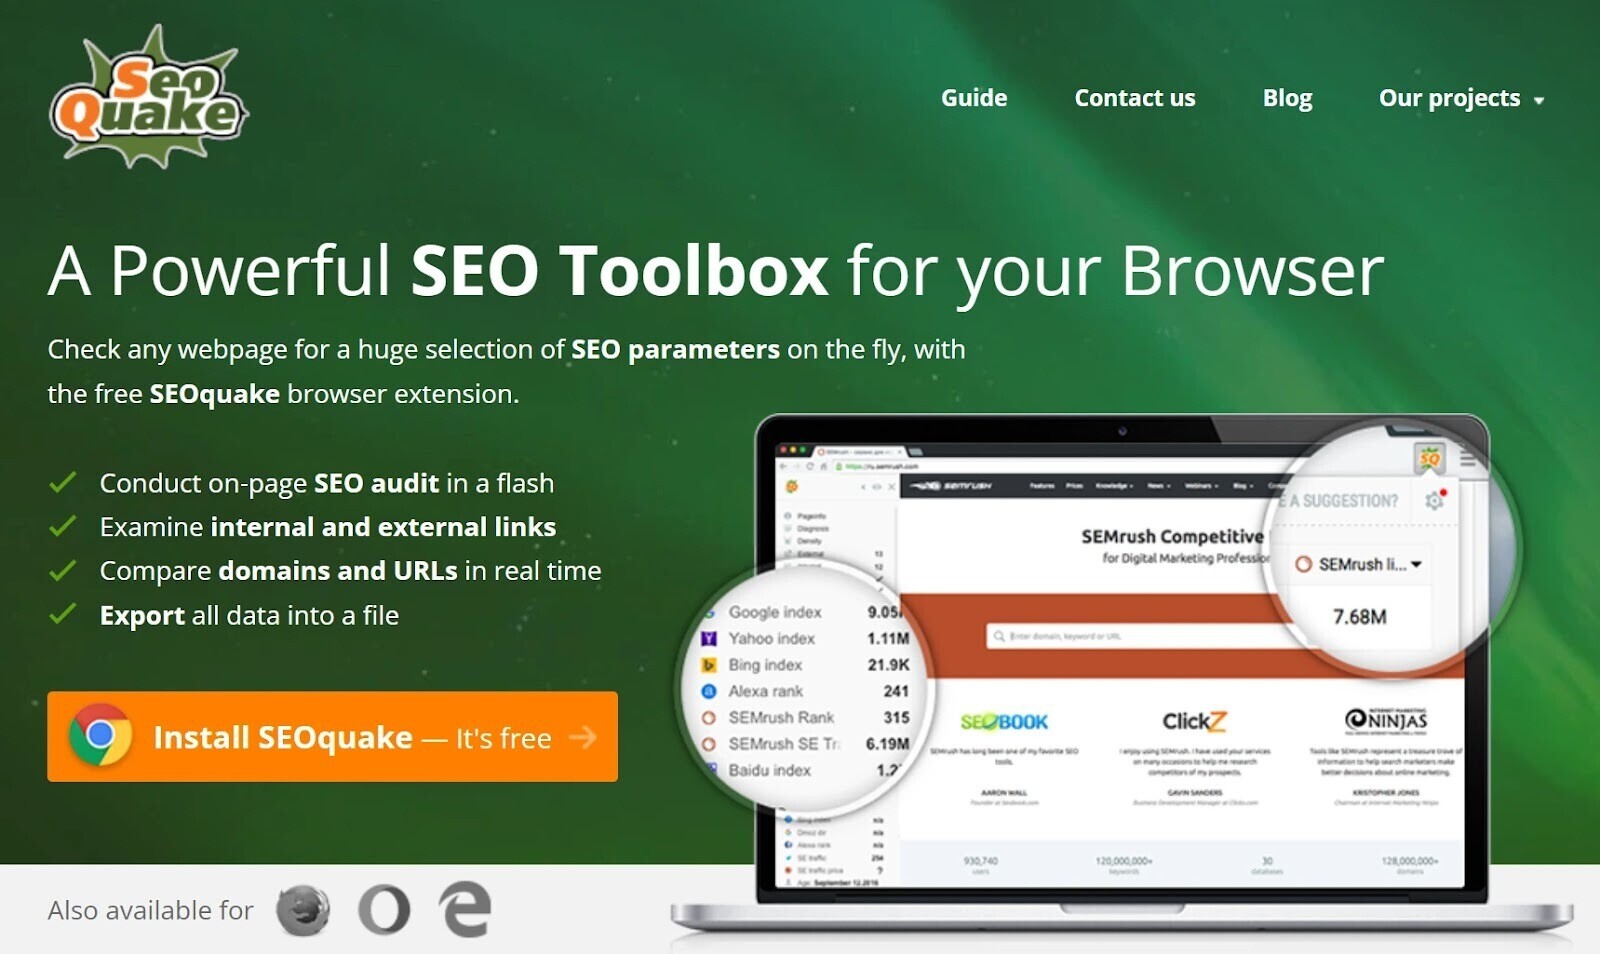 SEO Quake homepage with title "A Powerful SEO Toolbox for your Browser"